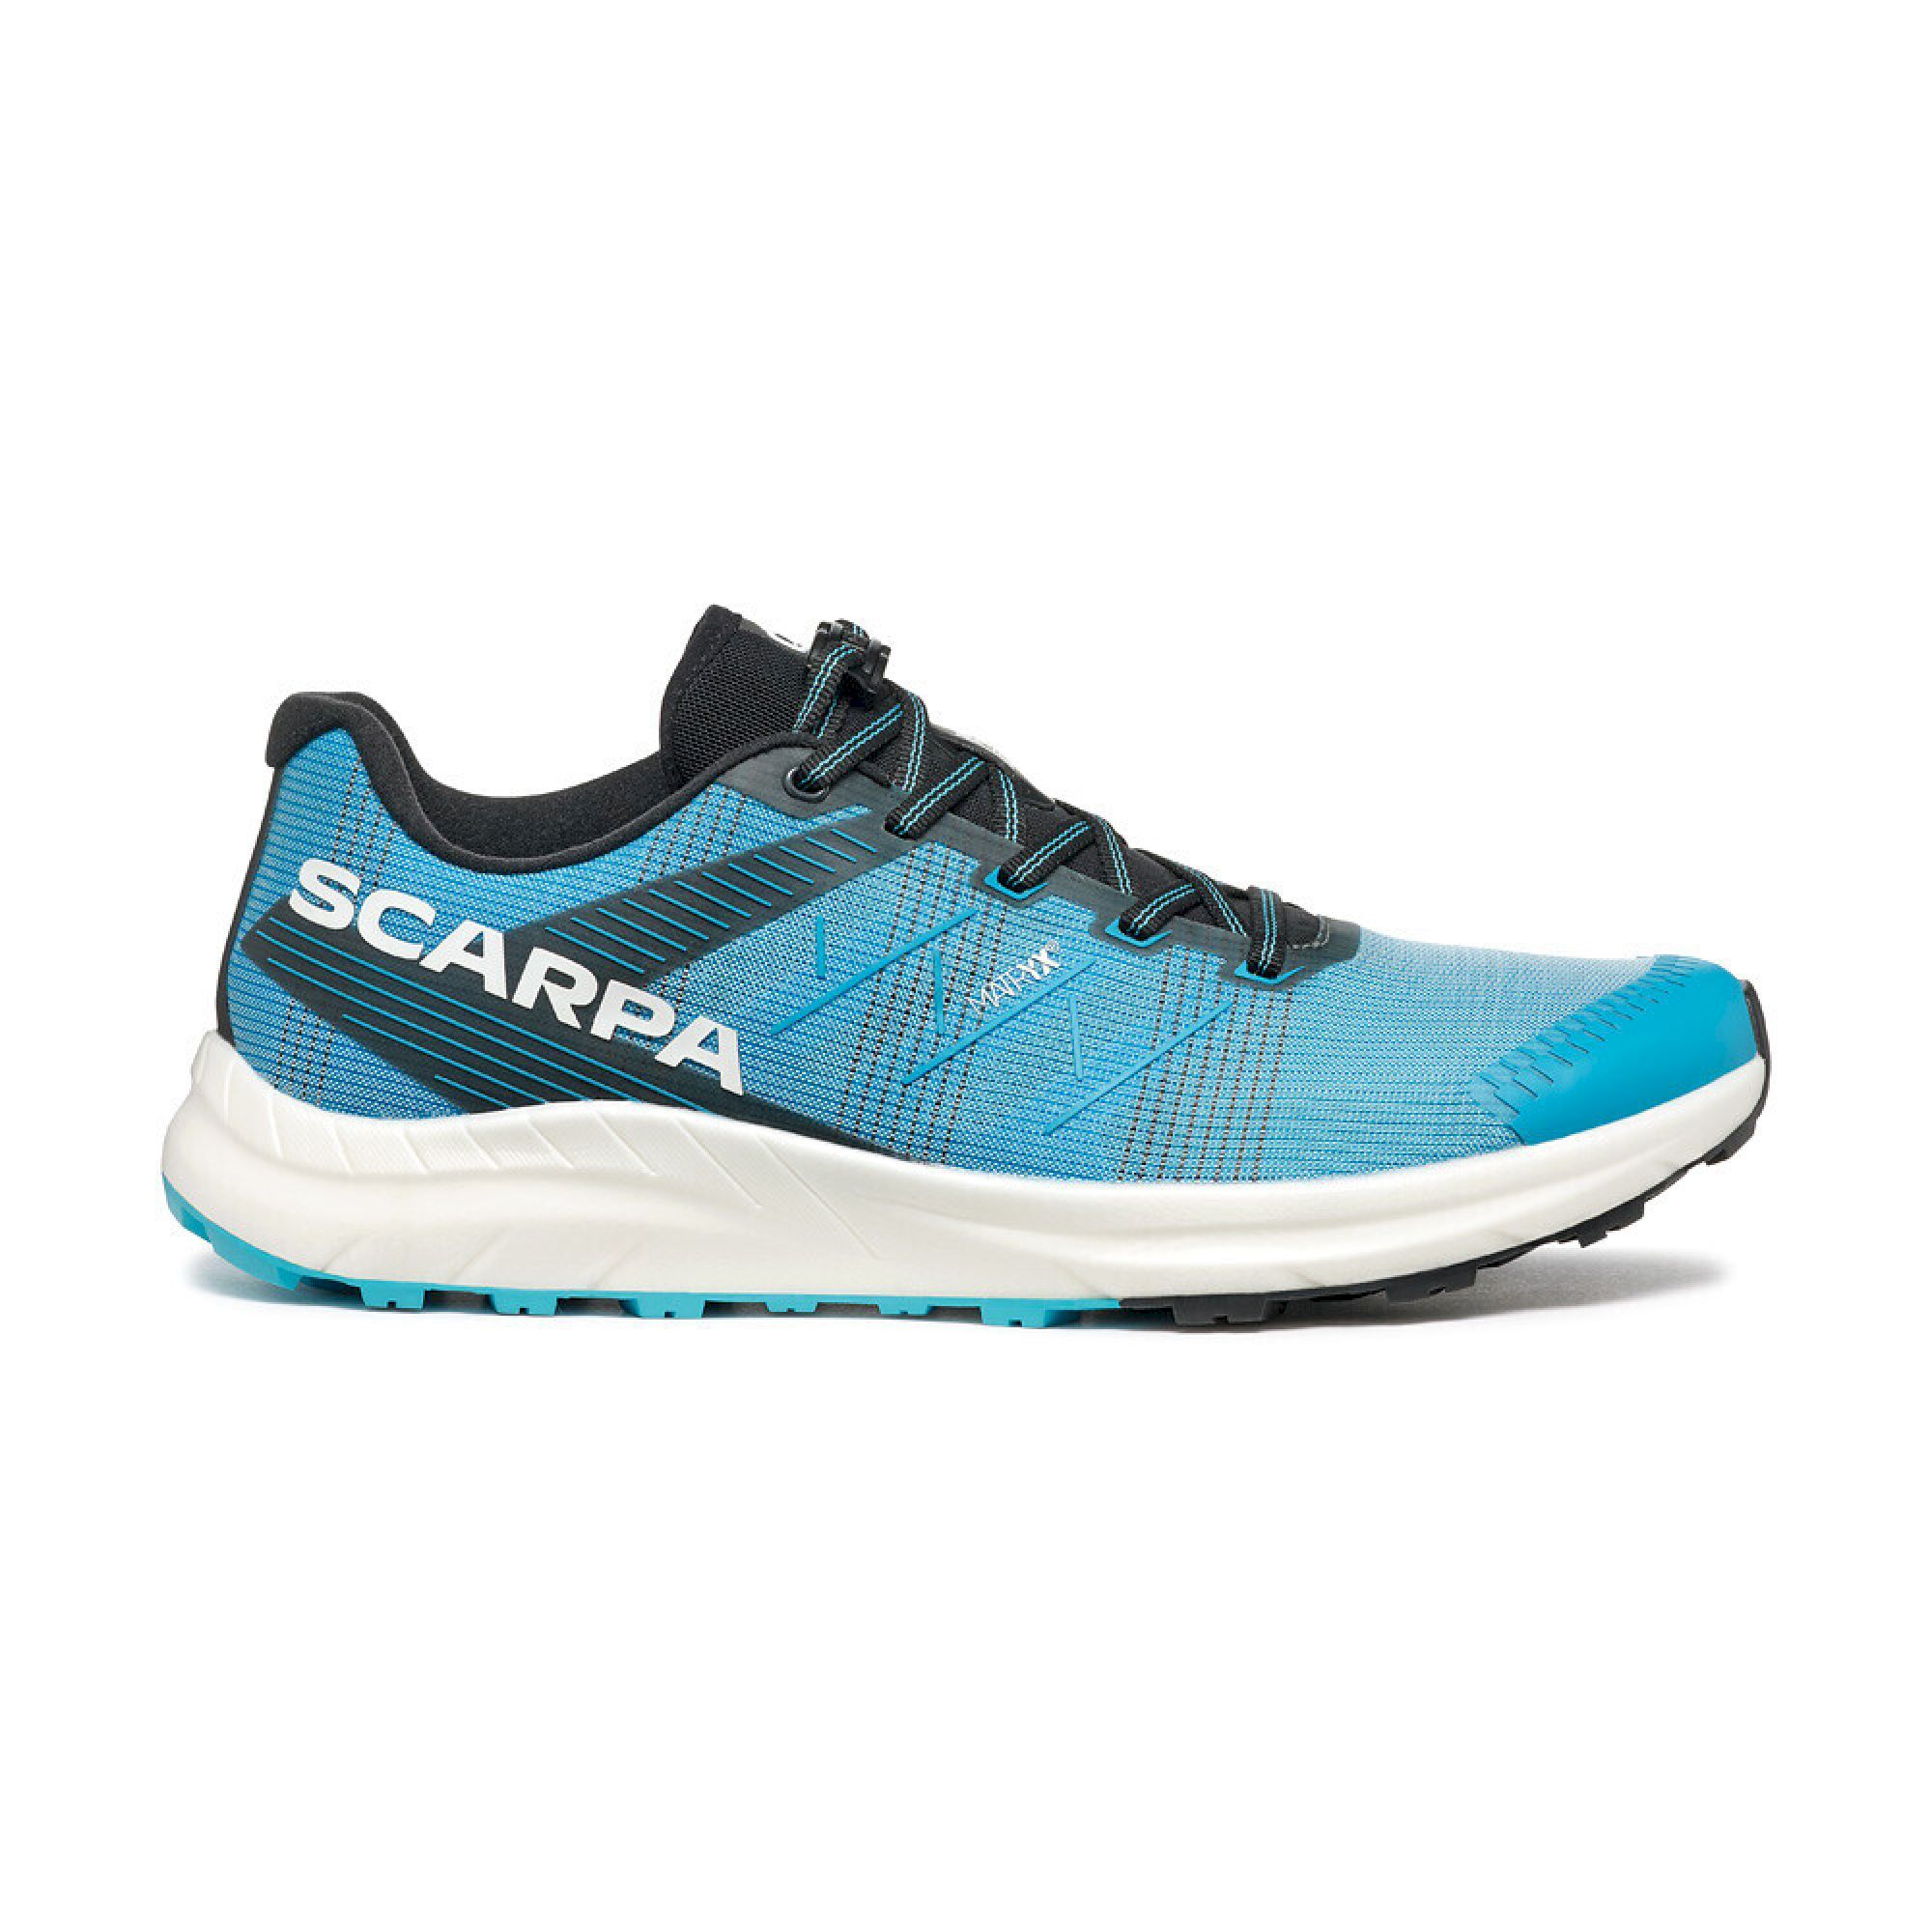 Scarpa Spin Race - Trail running shoes | Hardloop